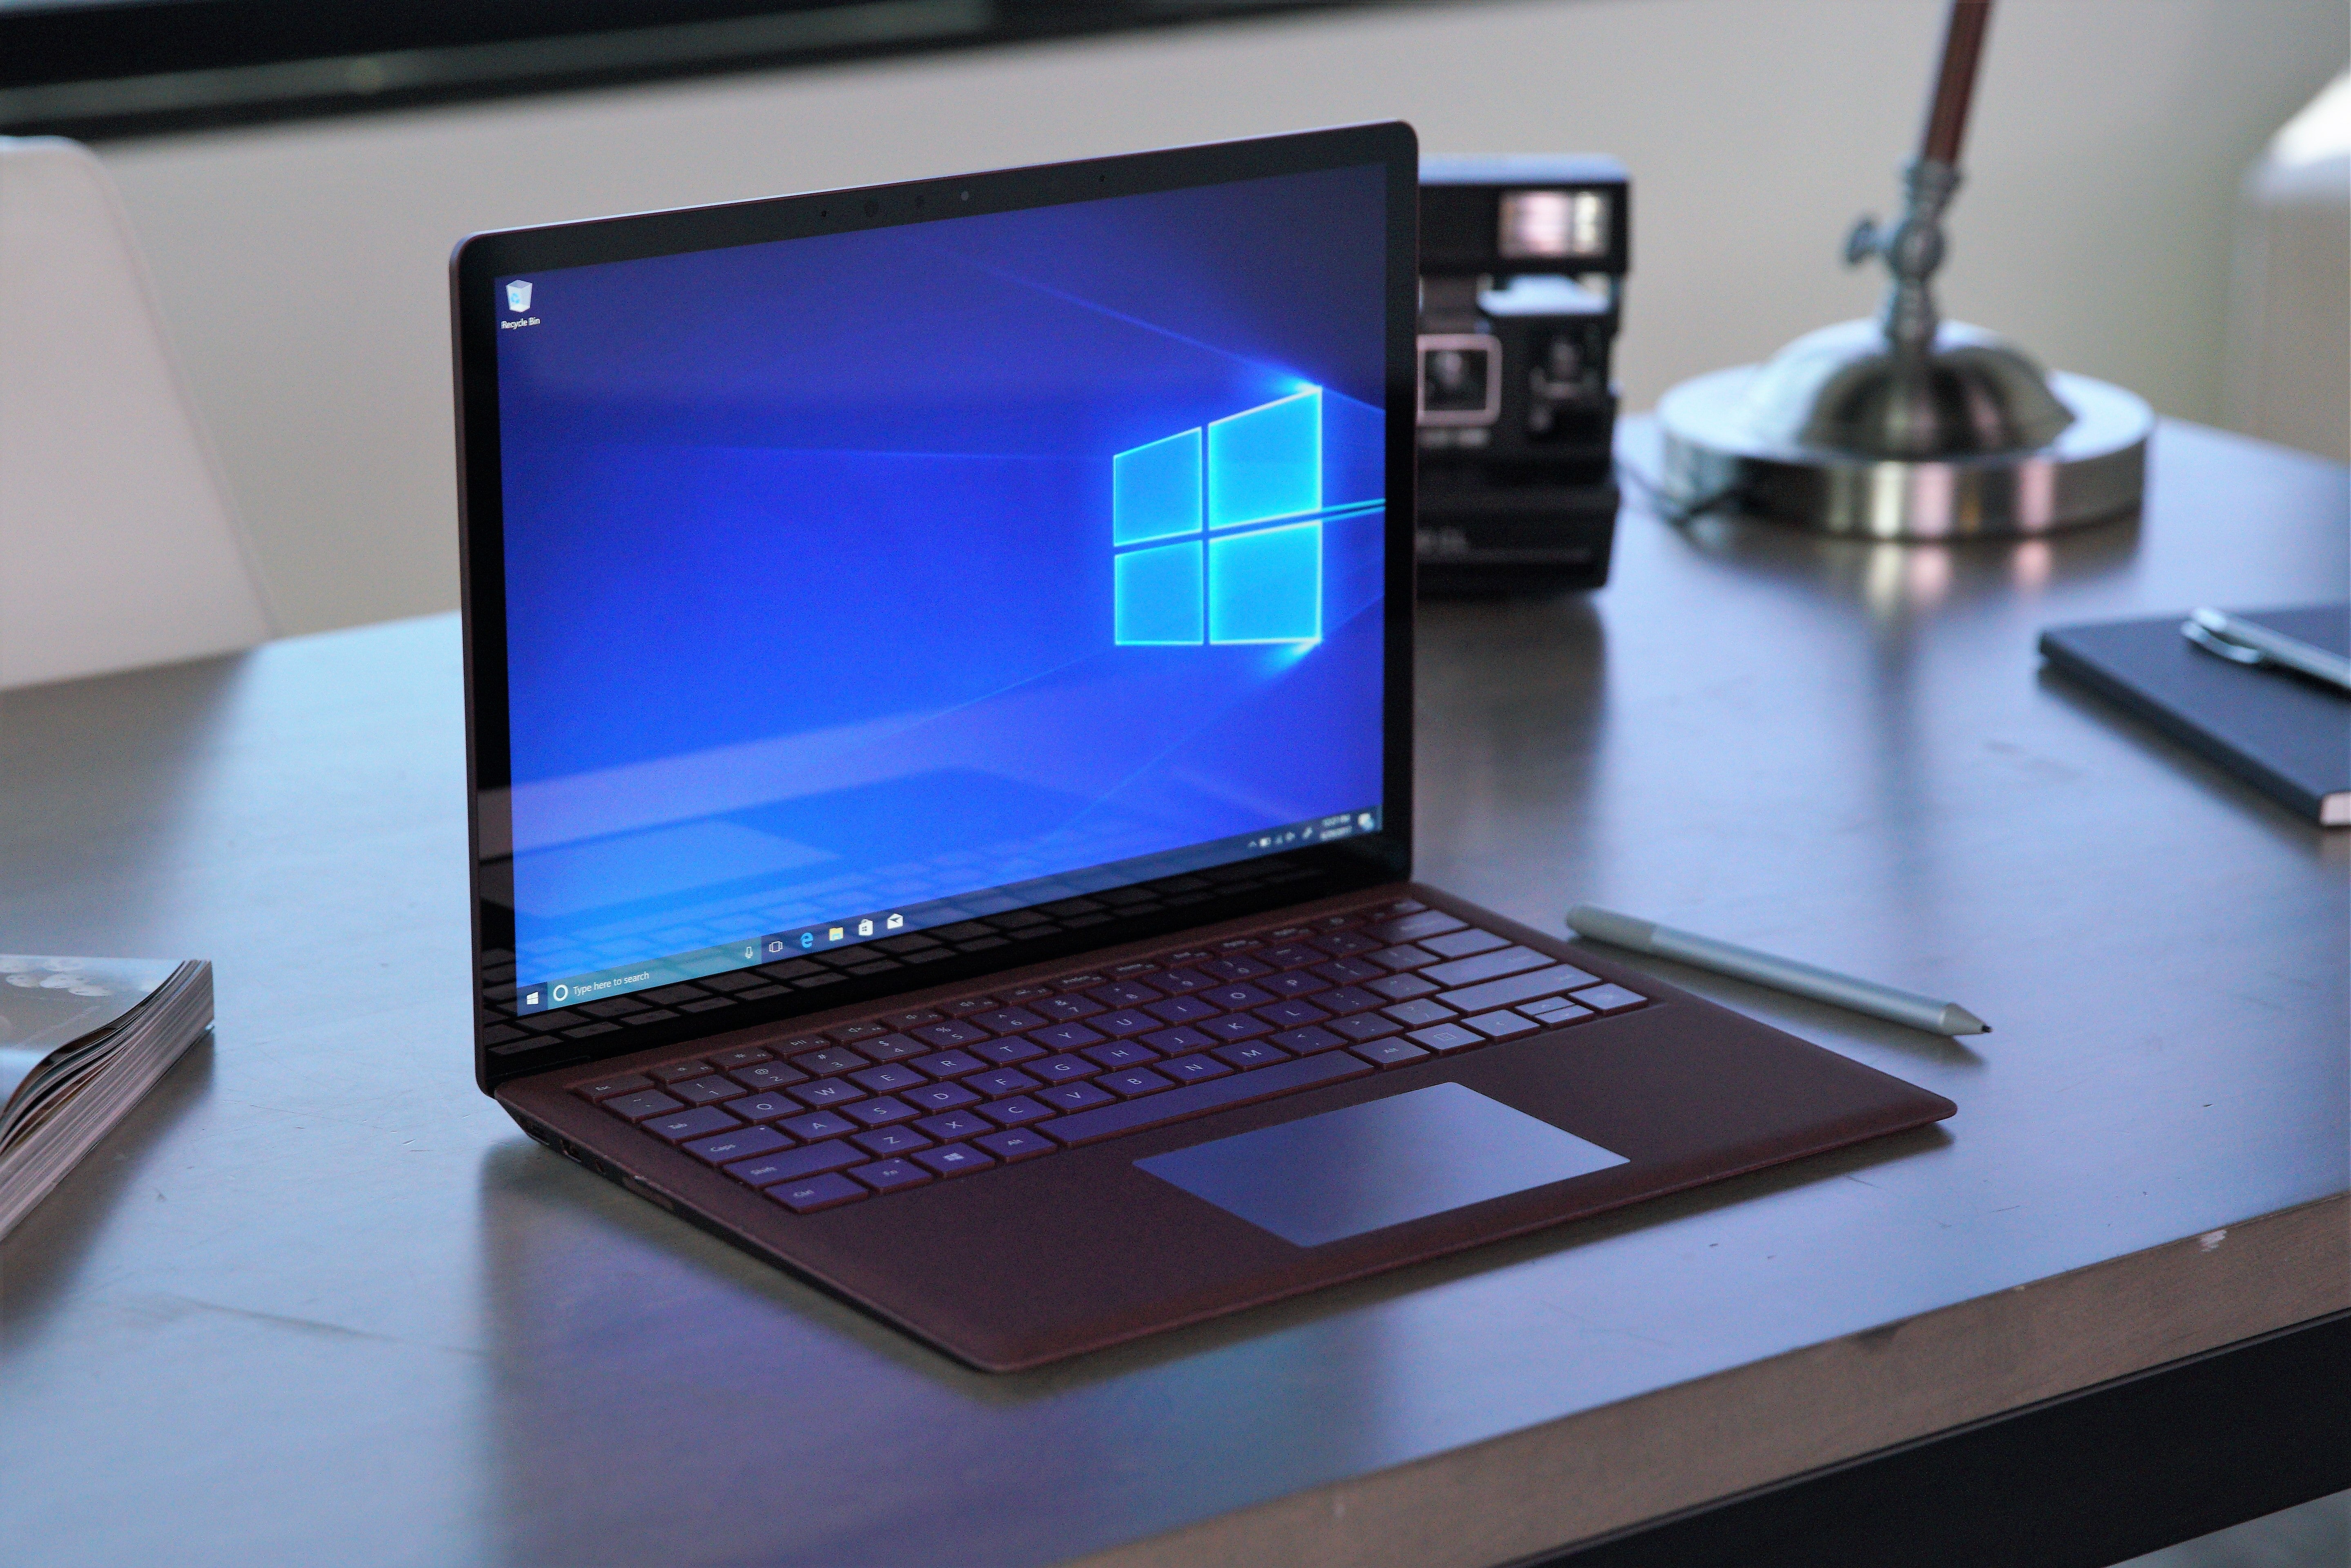 Windows 10 S review: Microsoft\u0026#39;s OS for students is hard to love | PCWorld